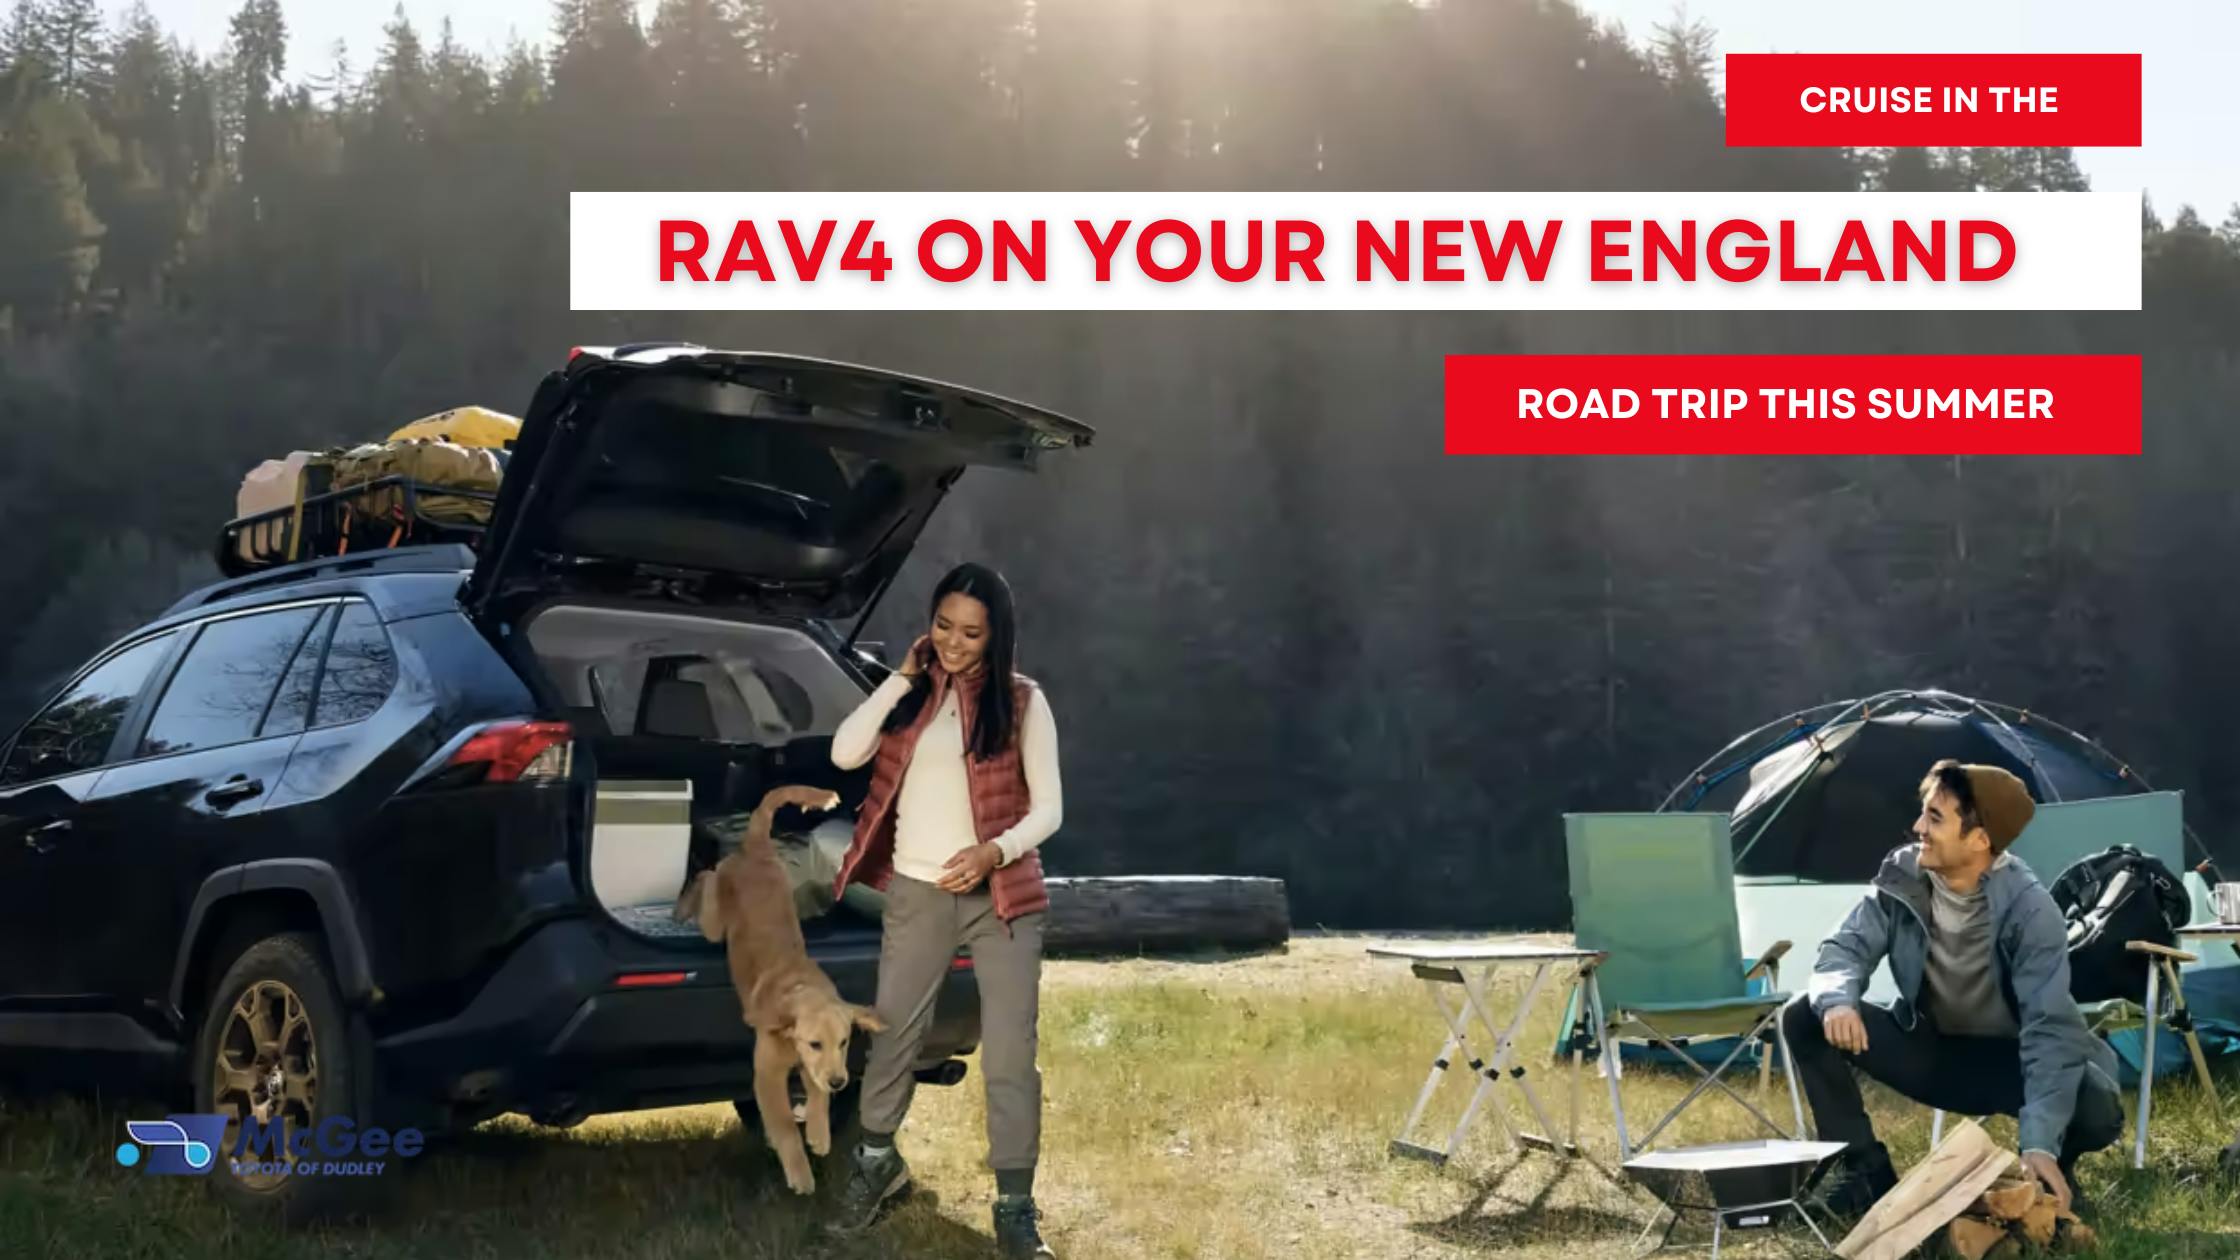 cruise in the rav4 on your trip new